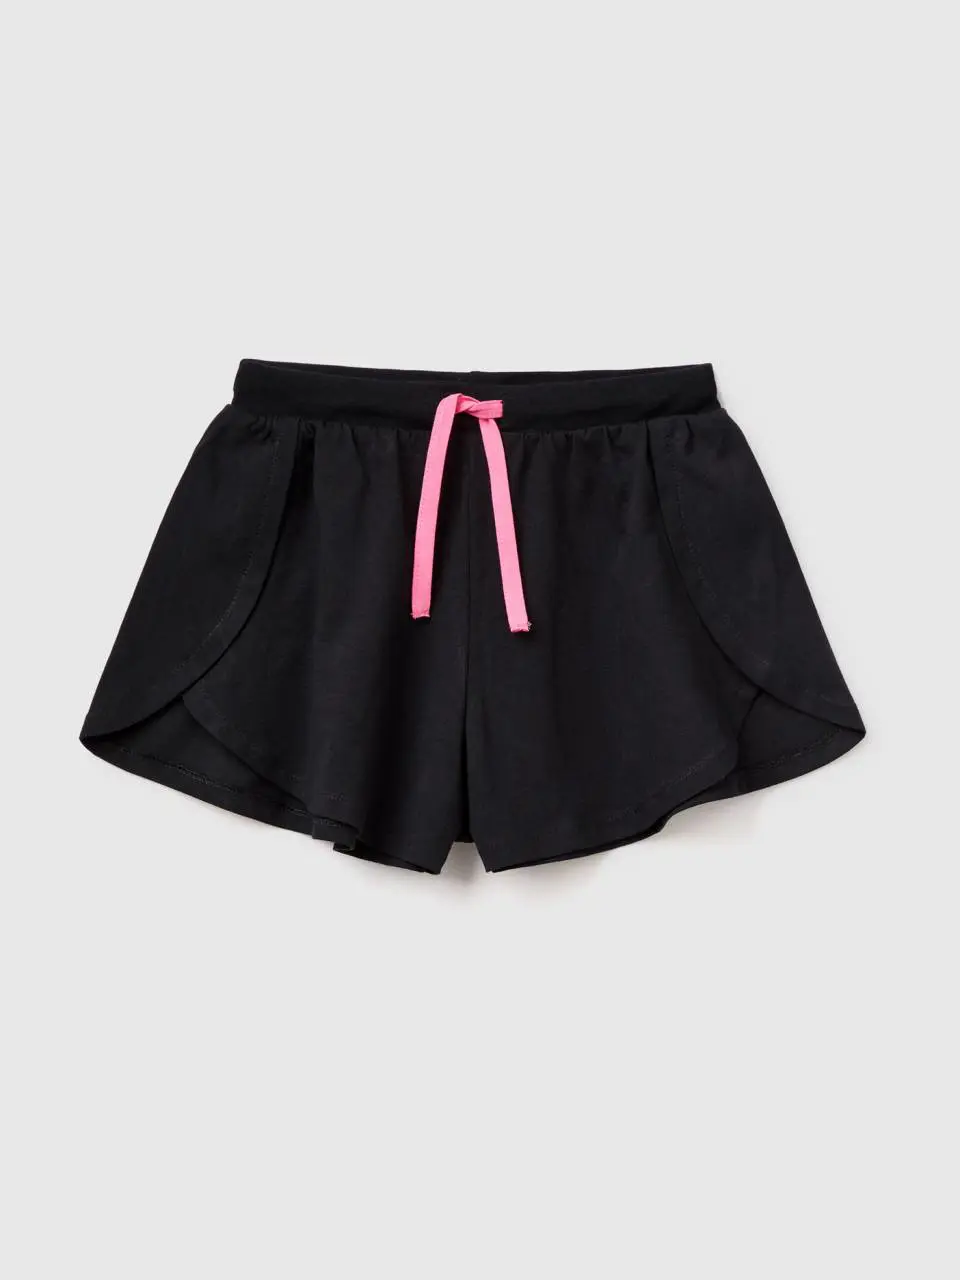 Benetton sporty shorts with slits. 1